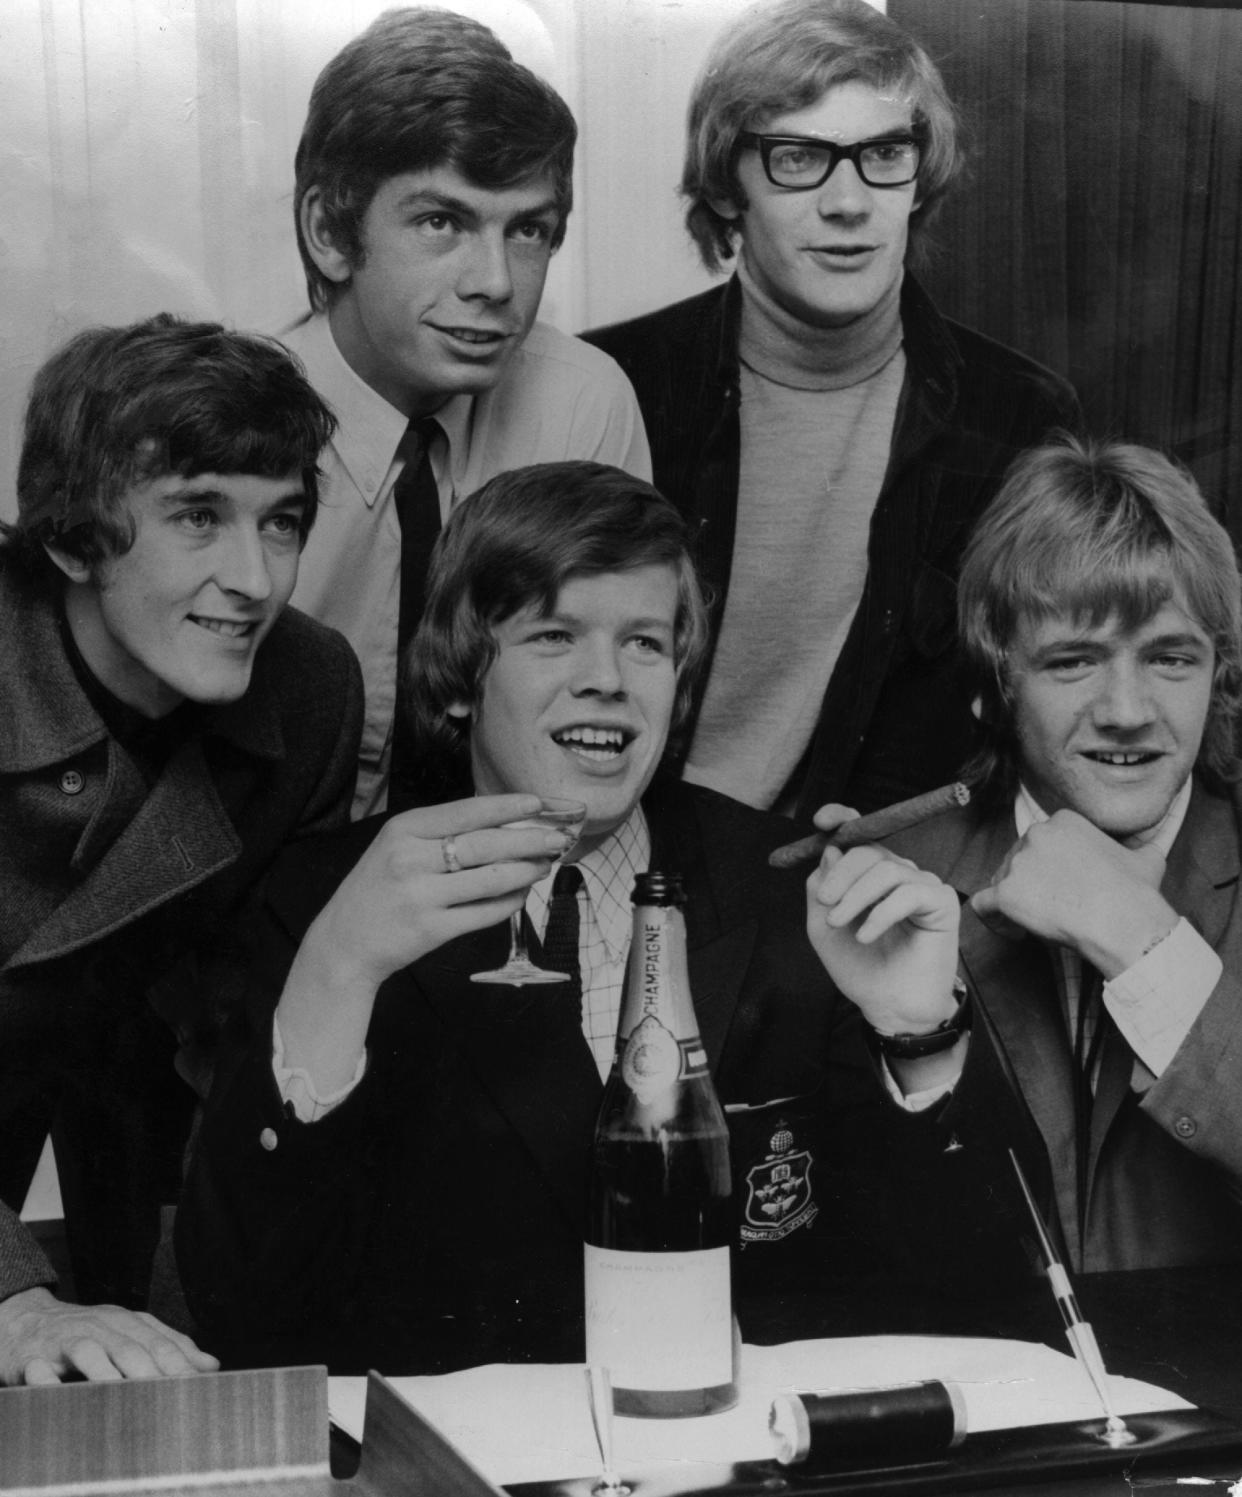 Herman's Hermits, shown in 1966 with singer Peter Noone (center) enjoying a glass of champagne and a cigar.